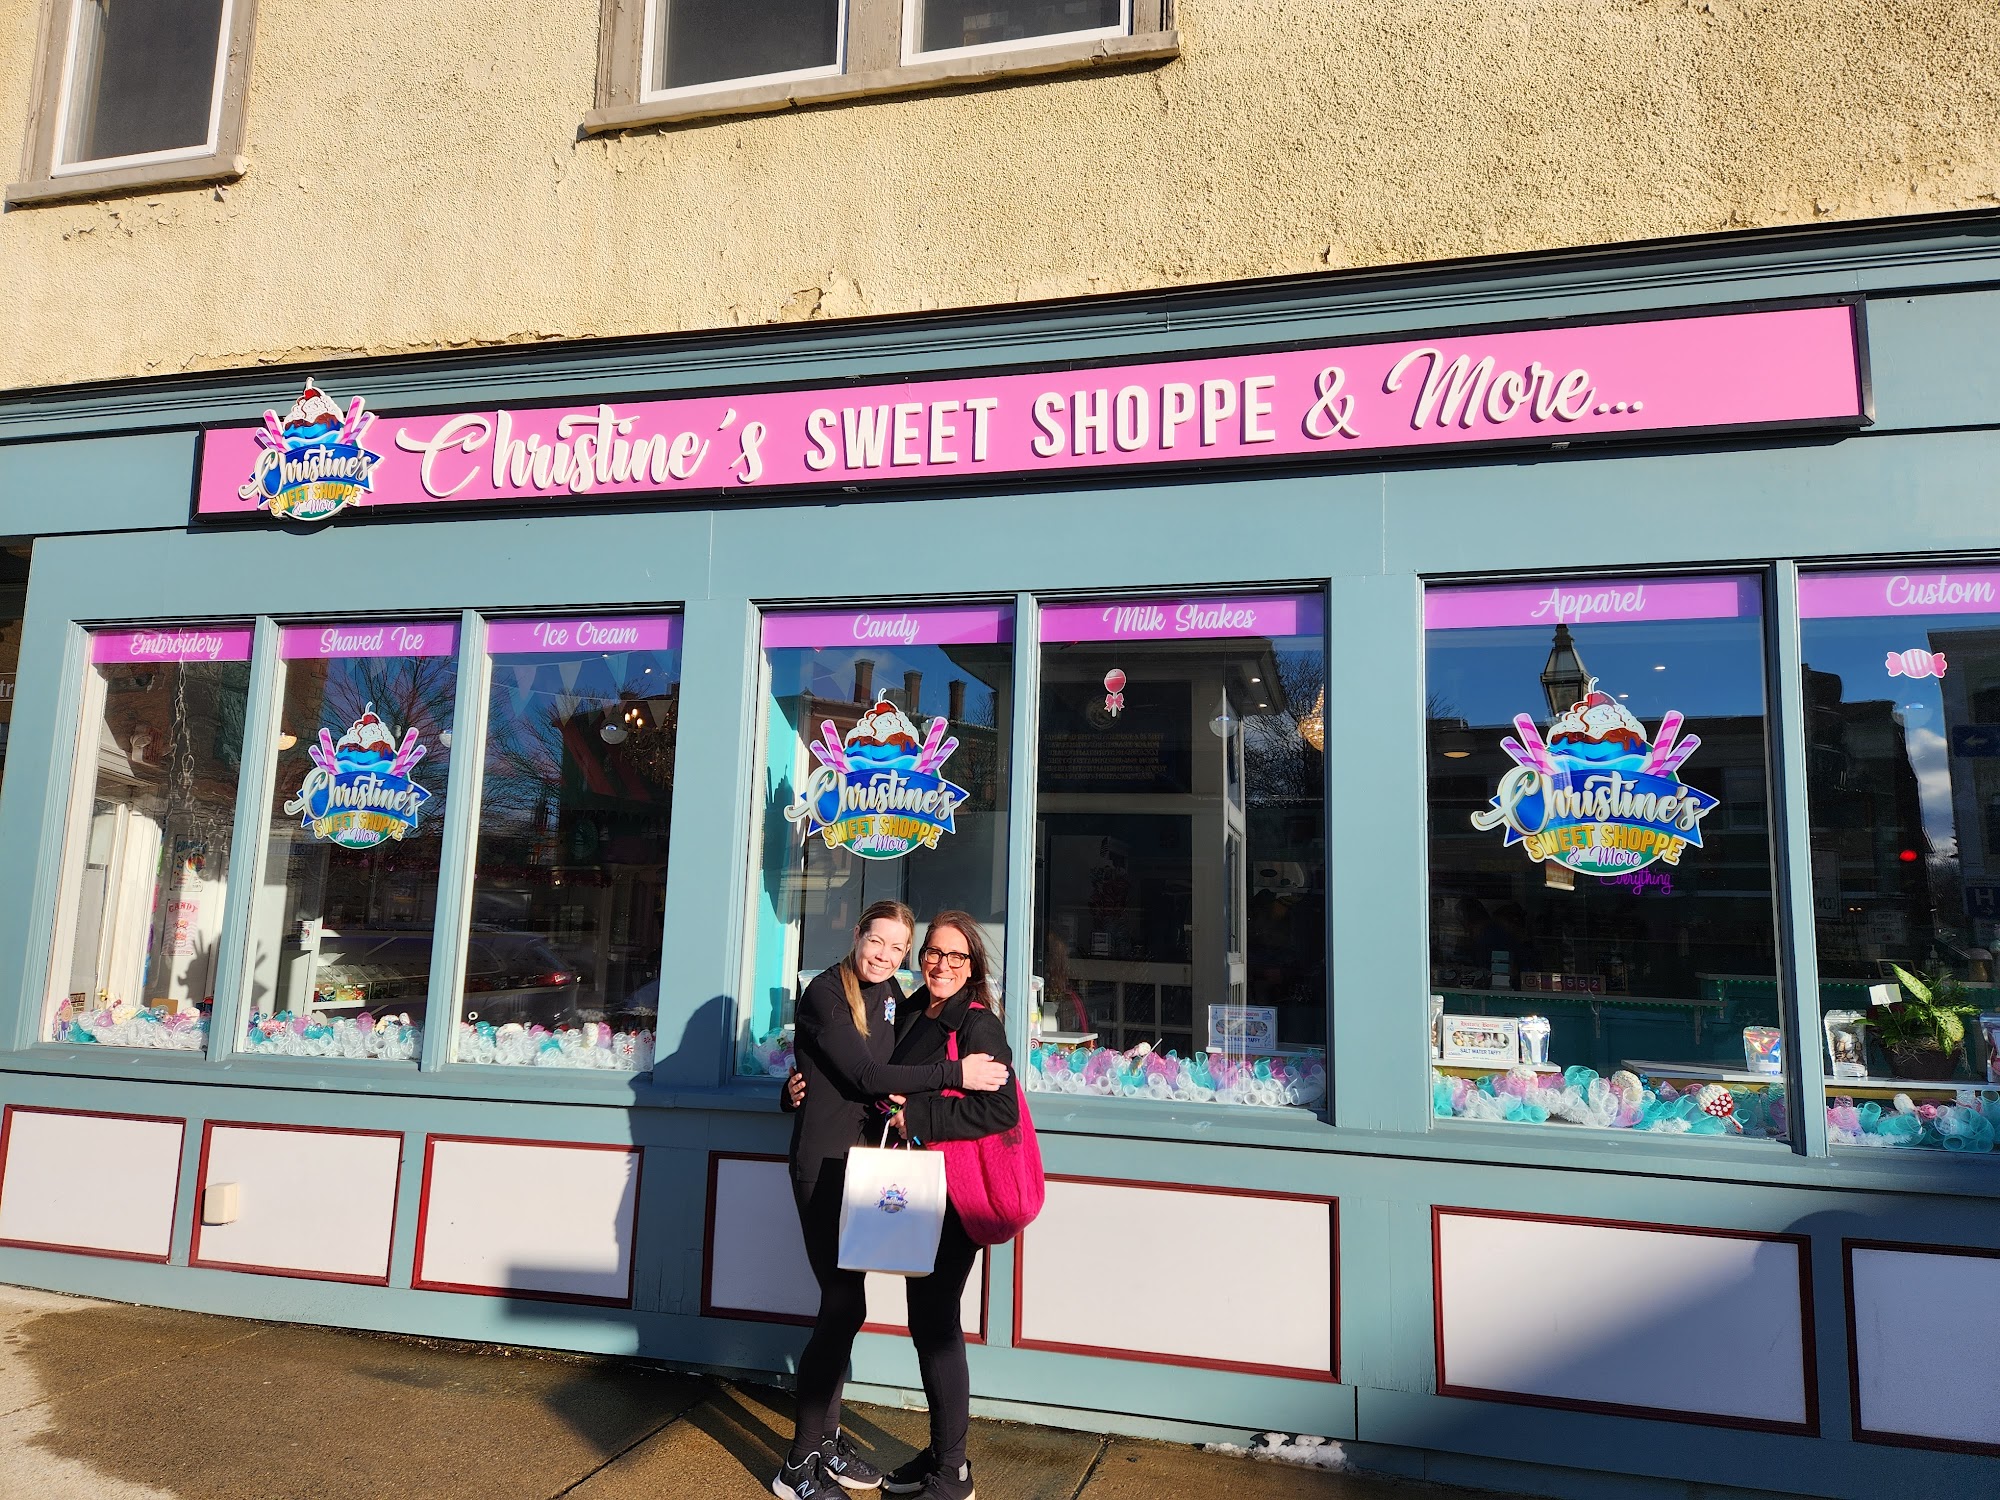 Christine’s Ice Cream, Shaved Ice, Candy & Sweet Shoppe & More